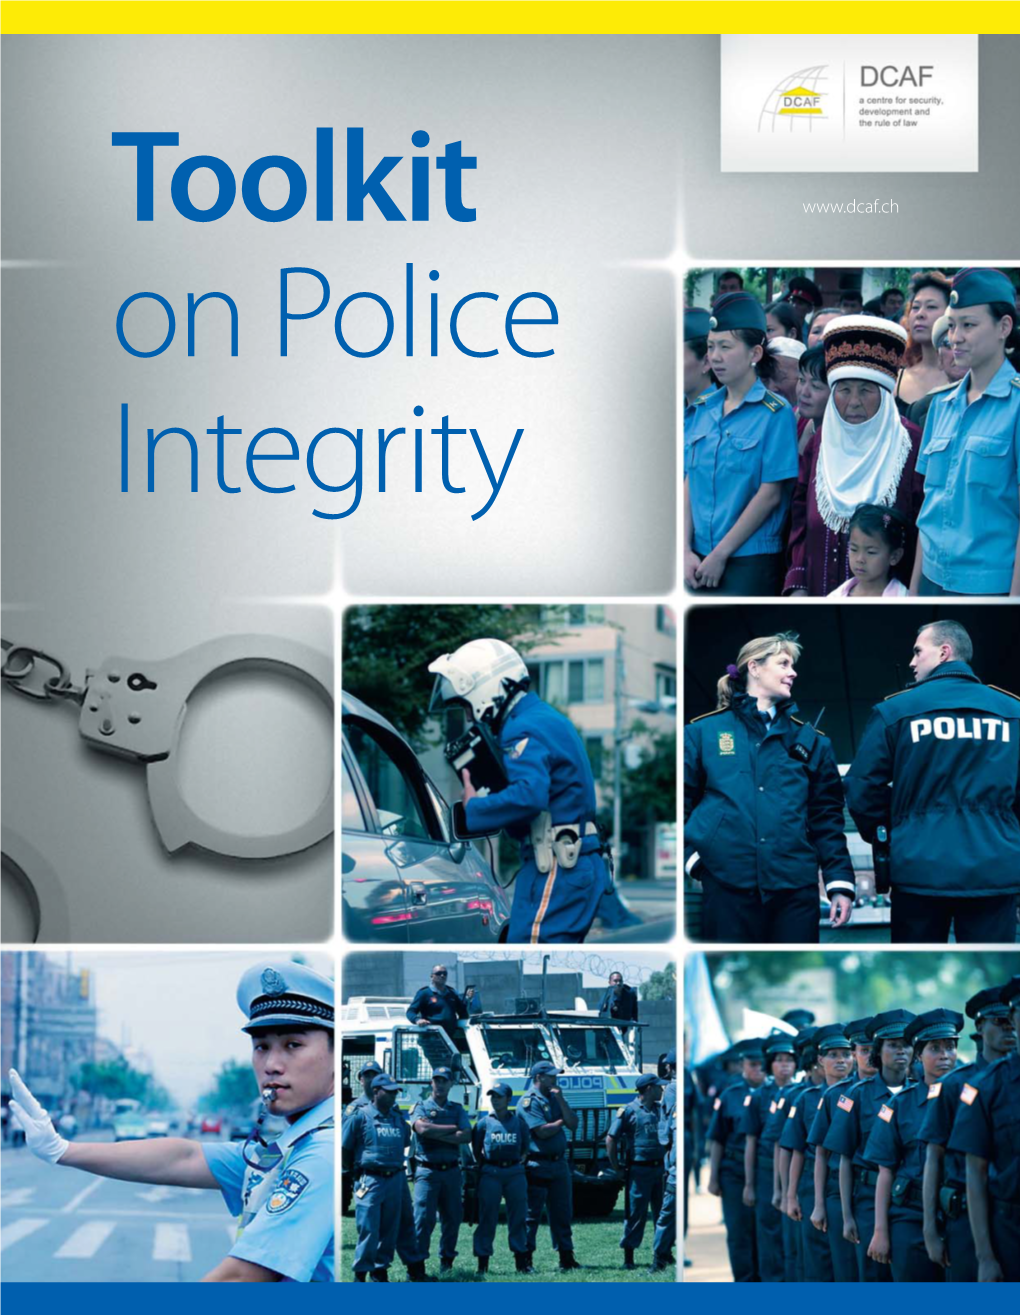 Toolkit on Police Integrity New Chapter 000*:Layout 1 2/24/12 12:01 PM Page 2